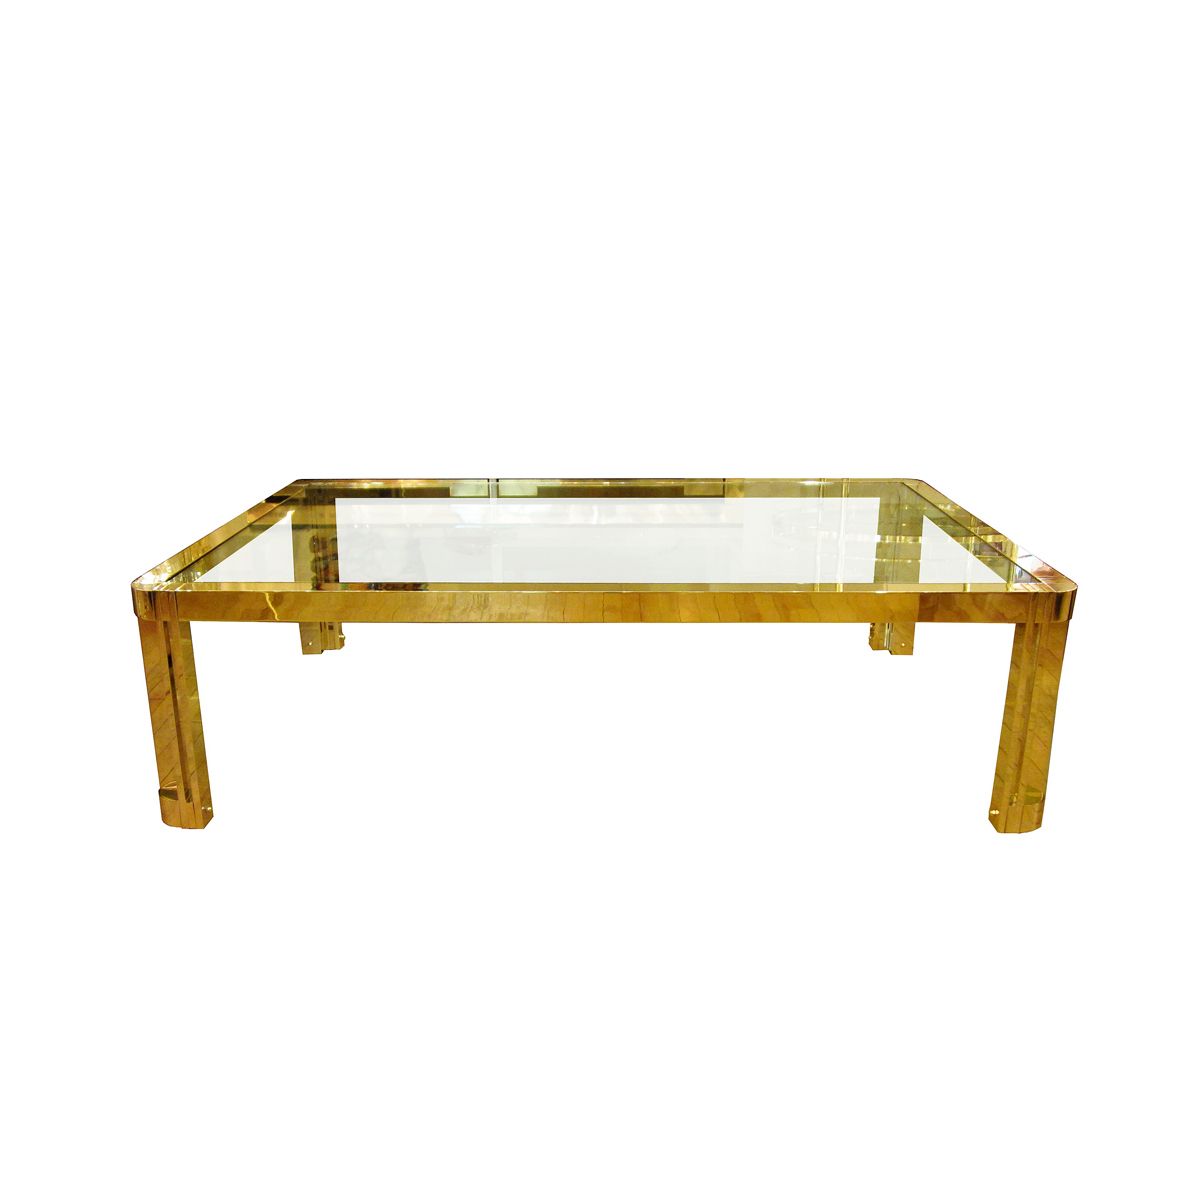 Best And Newest Rectangular Glass Top Coffee Tables Inside Large Rectangular Brass And Glass Coffee Table With (Gallery 20 of 20)